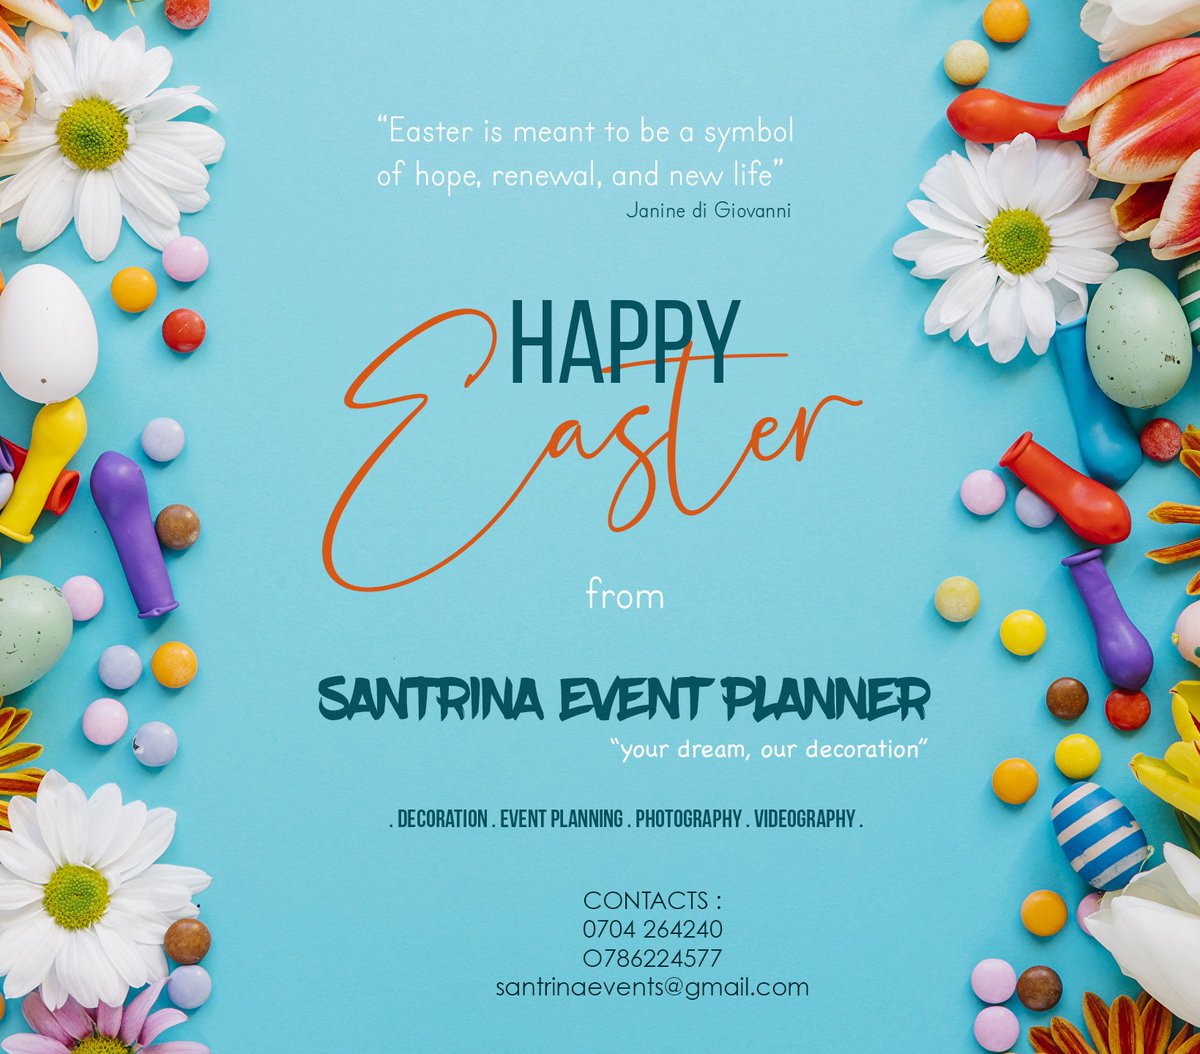 As you plan your next event. Think about #SantrinaEventPlanner for all event needs. Hustle no more

#HustleFree #StressFree #decoration #decor #brintedesigns